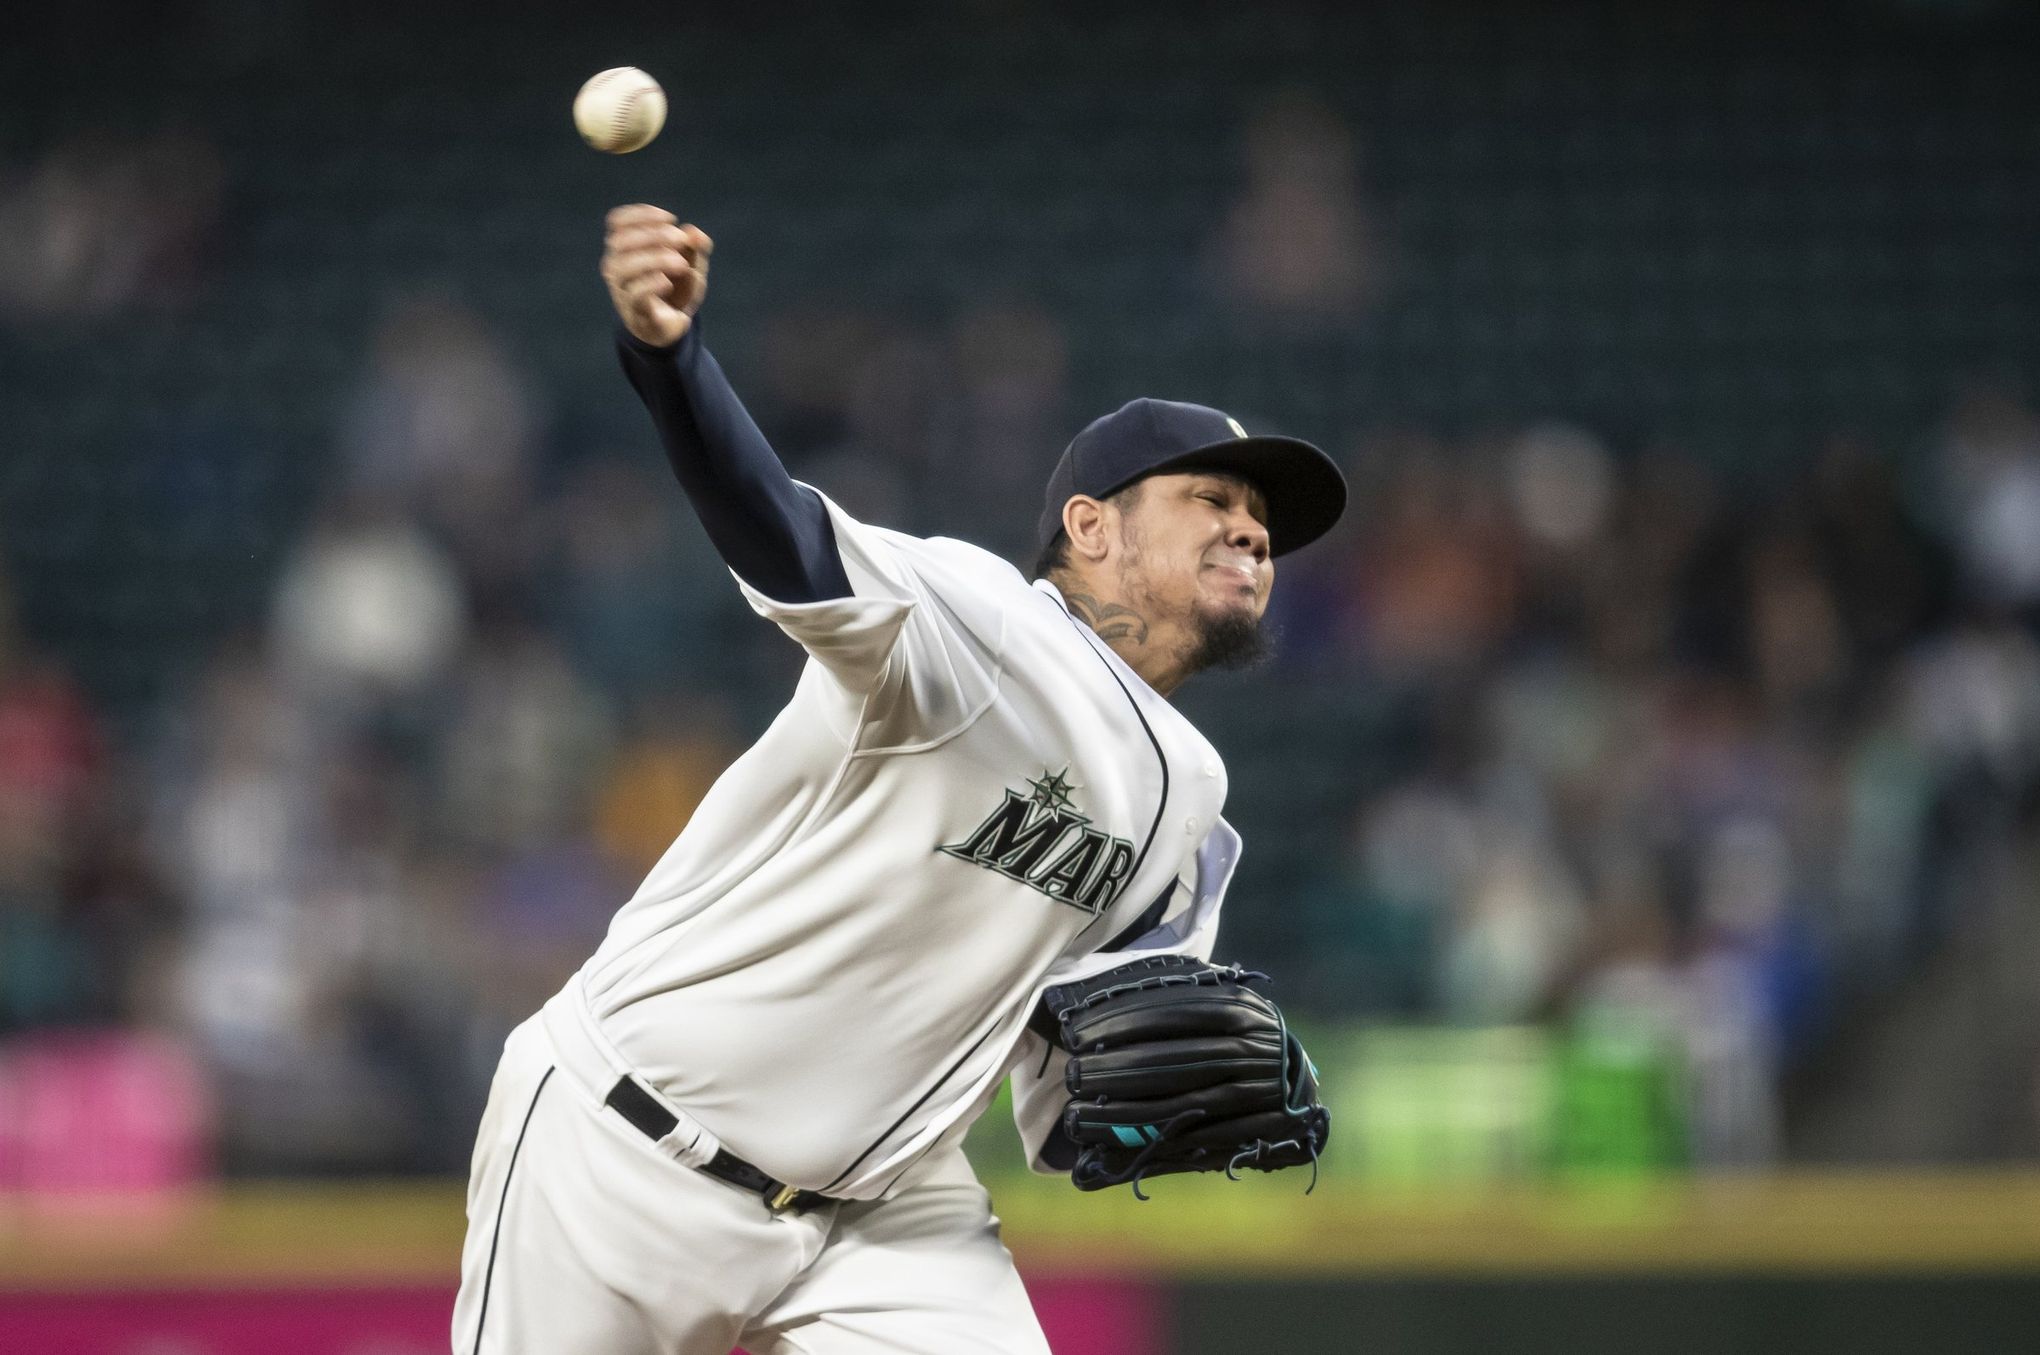 On 10th anniversary of Felix Hernandez's perfect game, Mariners